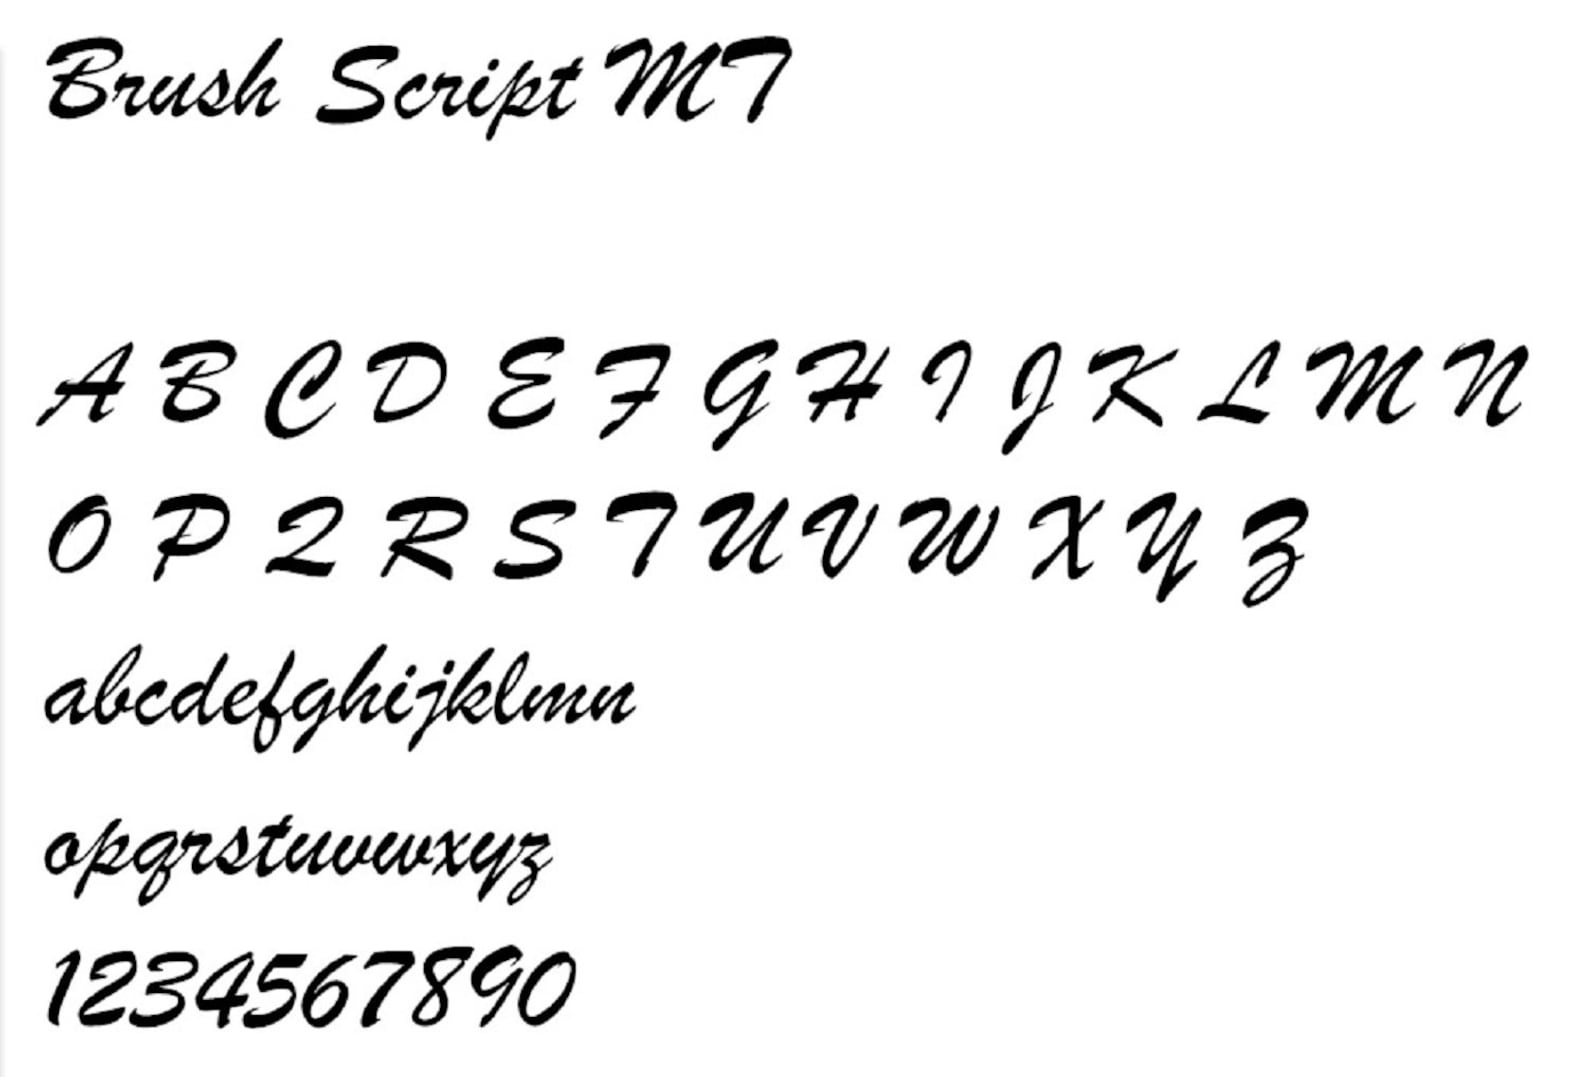 YOUR TEXT in "Brush Script MT" font, up to 20 characters.